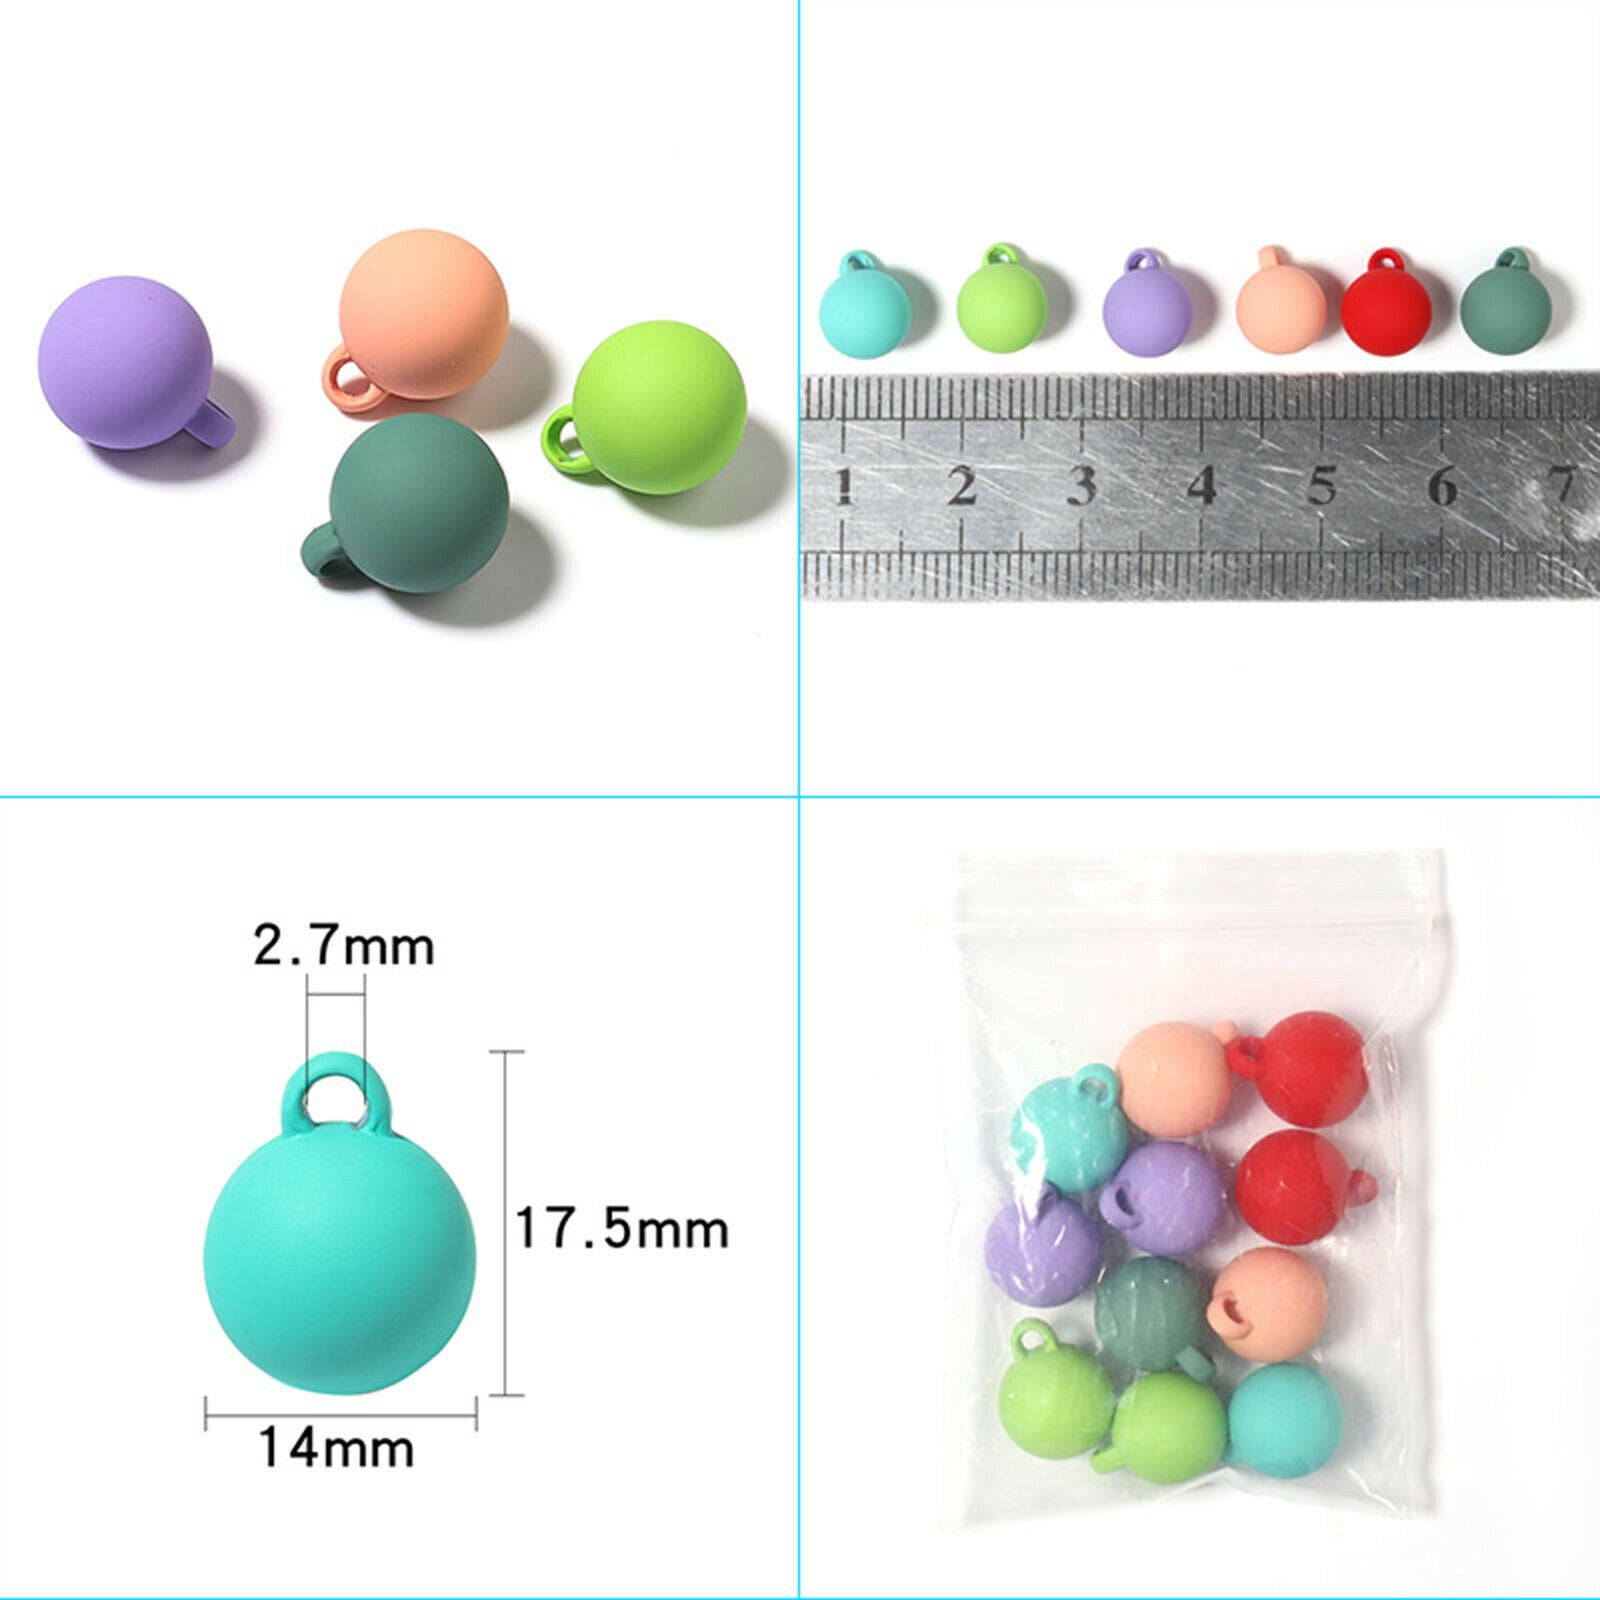 30 14mm Acrylic Colored Frosted Charms Pendants Beads for Jewelry Making Mix